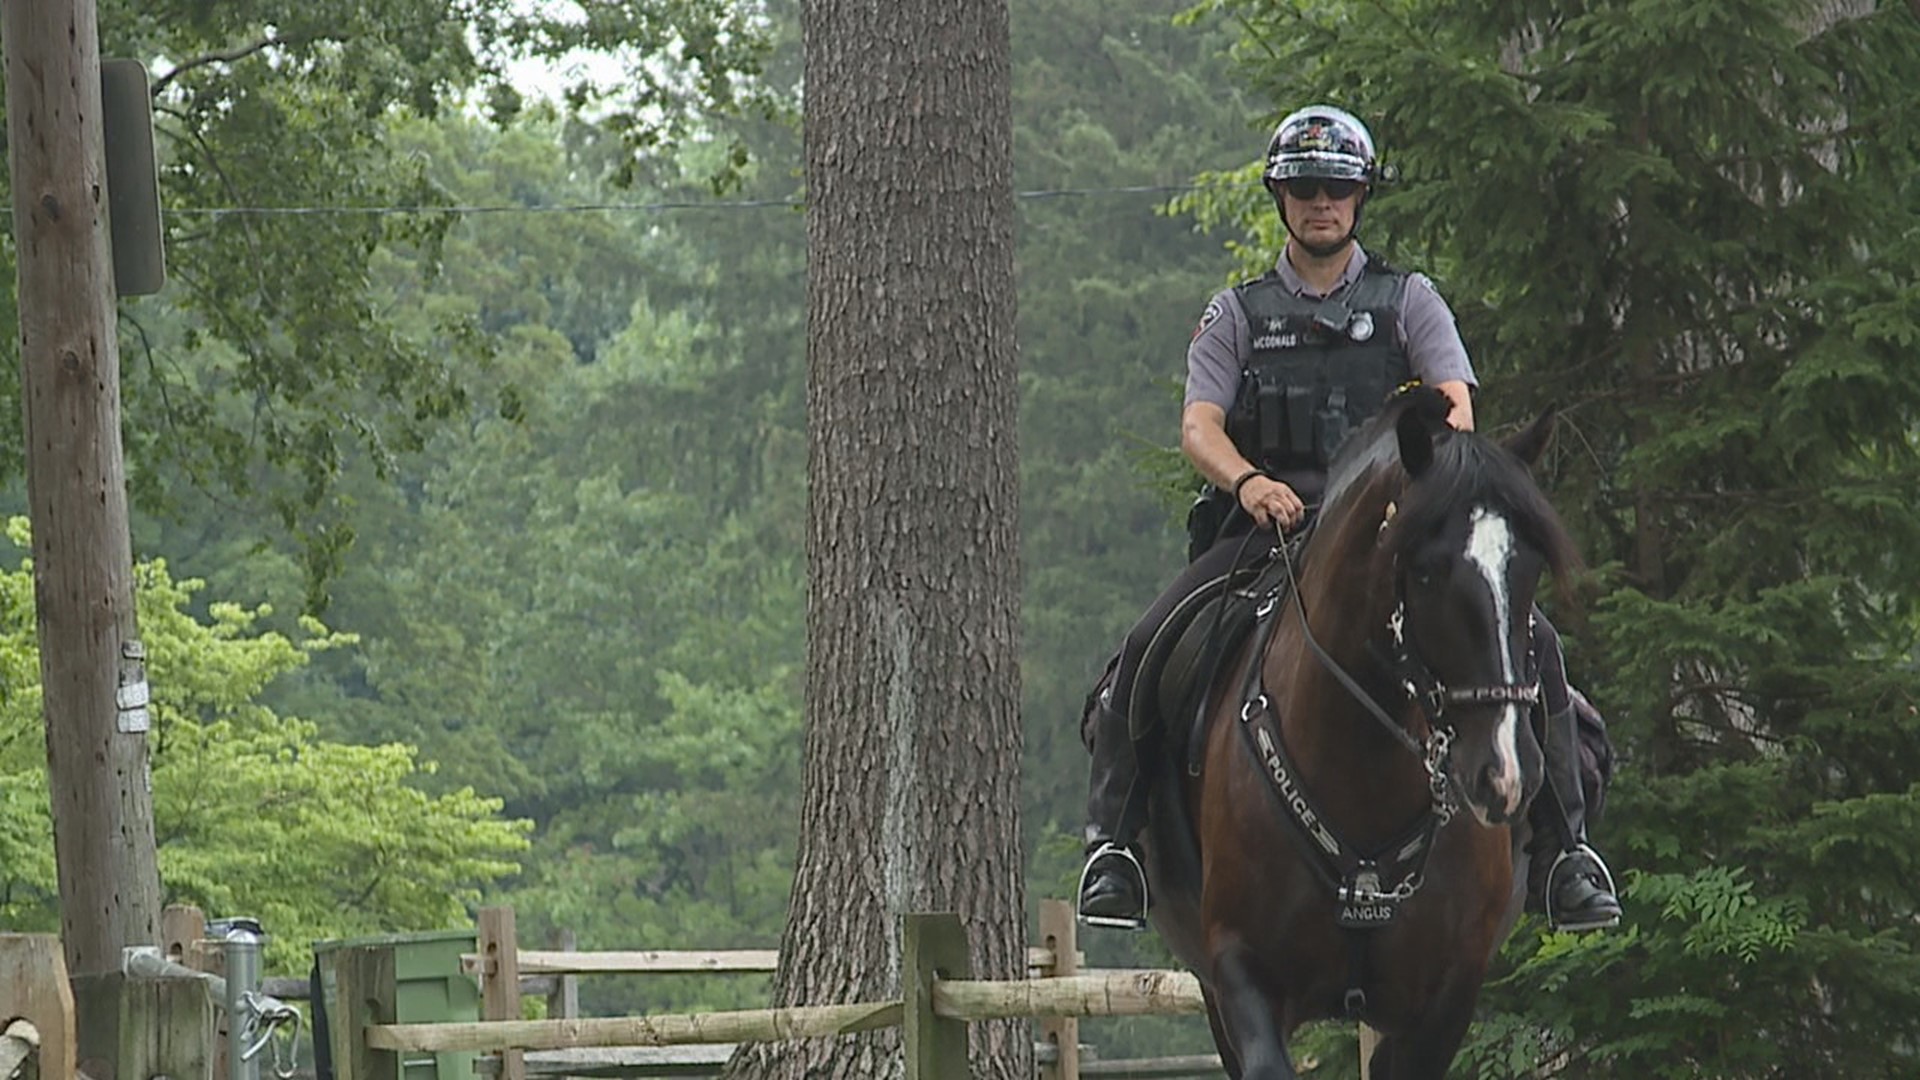 Lancaster City Police Mounted and K-9 Unit welcome its newest patrol horse on the streets.